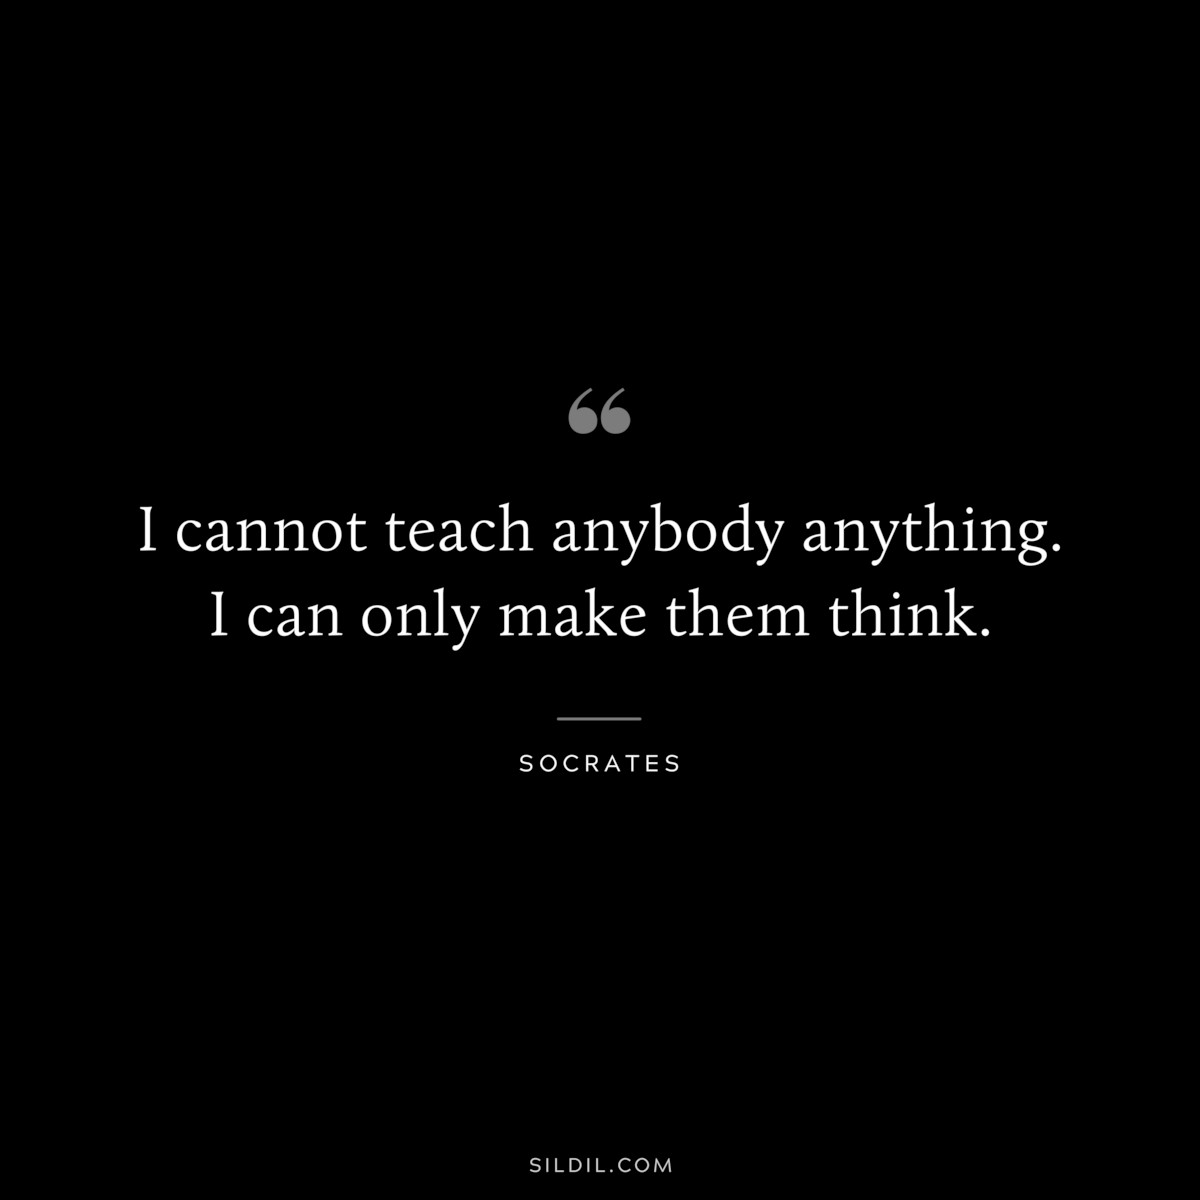 I cannot teach anybody anything. I can only make them think. ― Socrates